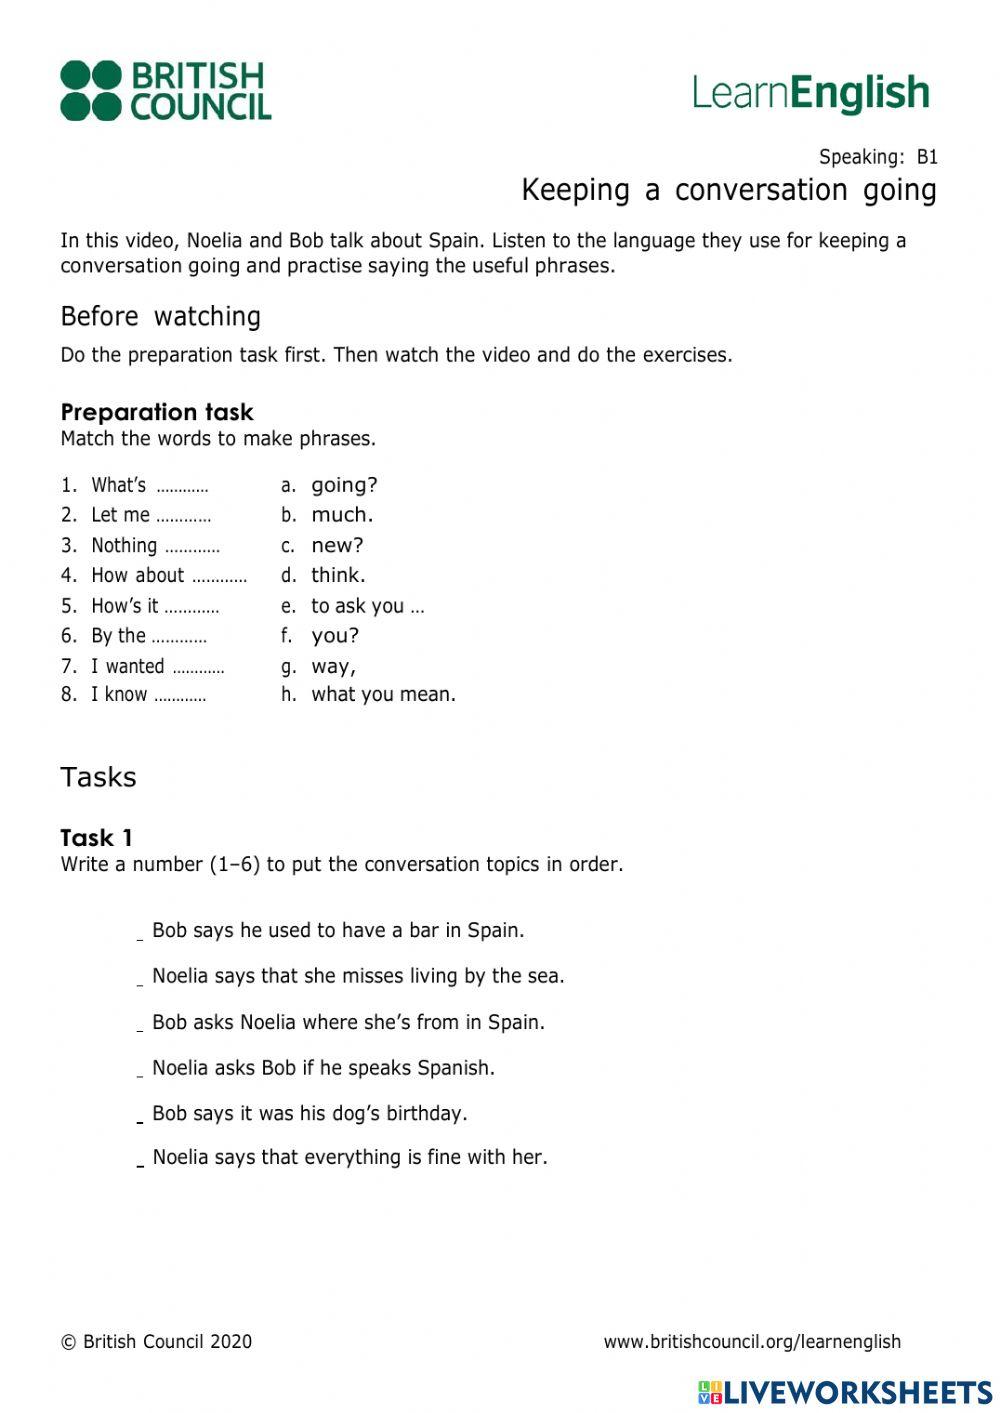 British Council - keeping a conversation going - B1 LEVEL worksheet | Live  Worksheets